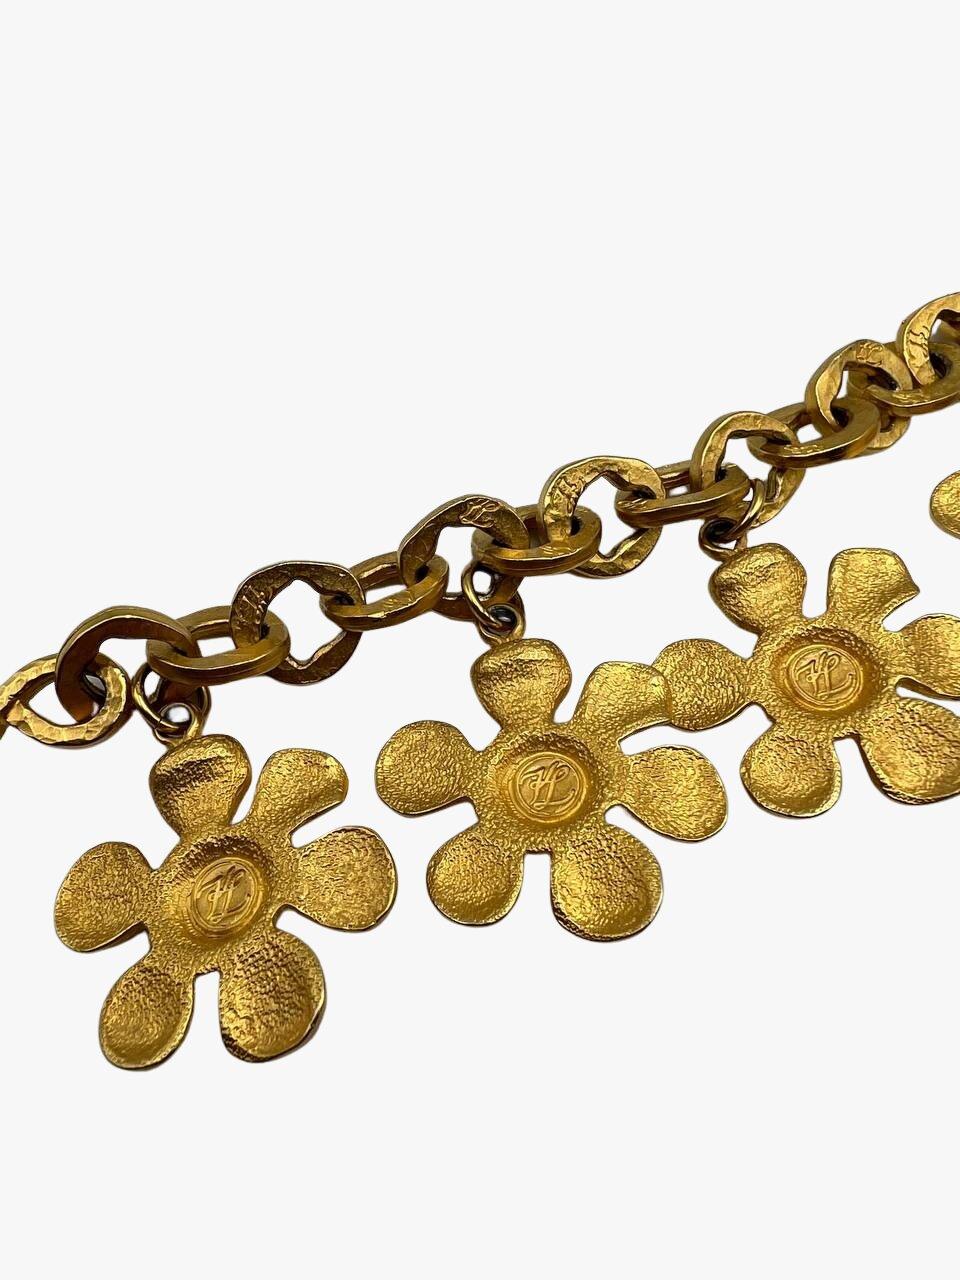 Karl Lagerfeld Vintage 24k Gold Plated Daisy Flower Charm Bracelet, 1980s In Excellent Condition For Sale In New York, NY